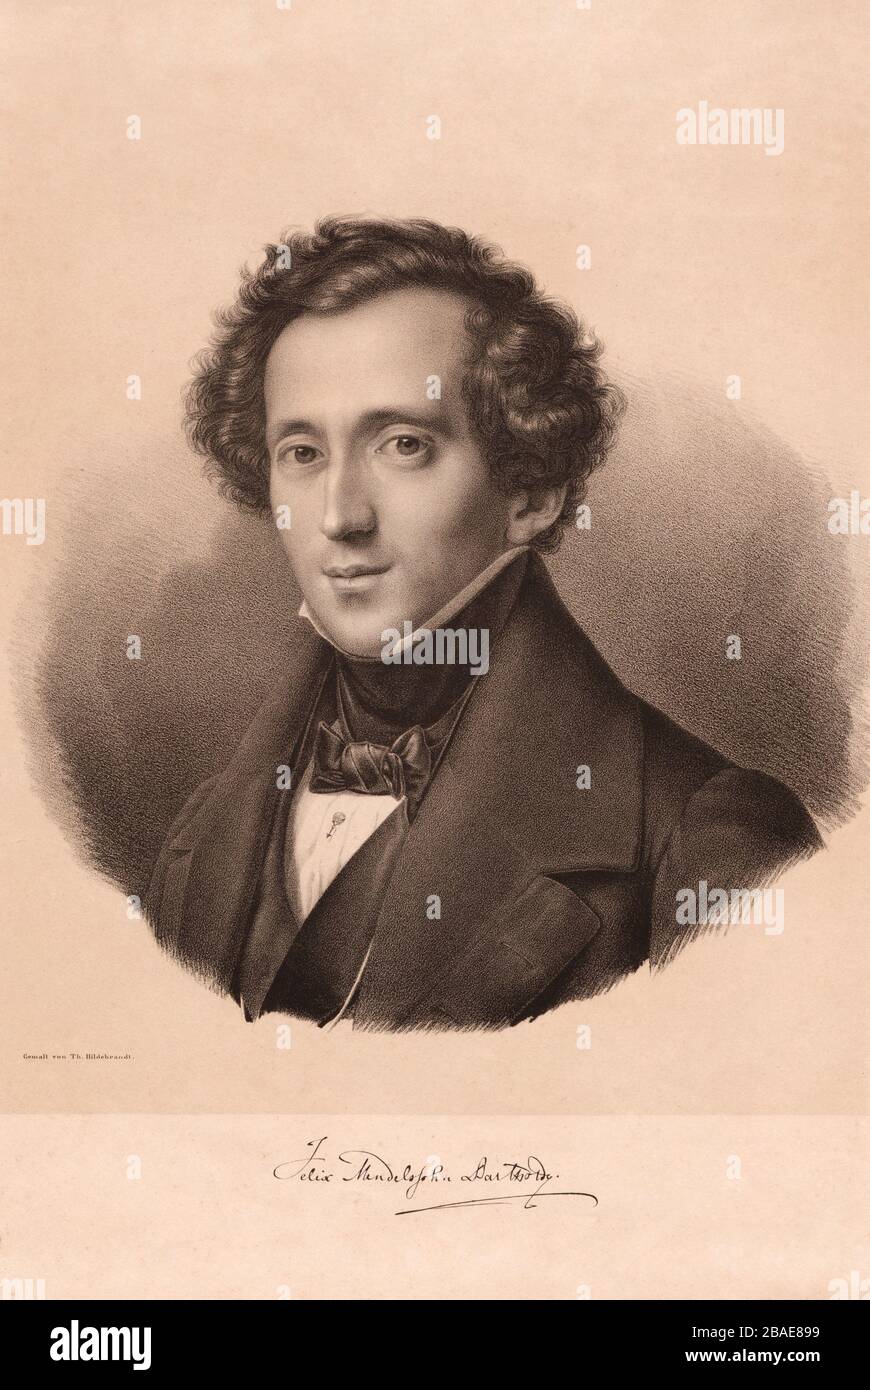 Picture of Jakob Ludwig Felix Mendelssohn Bartholdy (1809 – 1847),  a German composer, pianist, organist and conductor of the early Romantic period. M Stock Photo